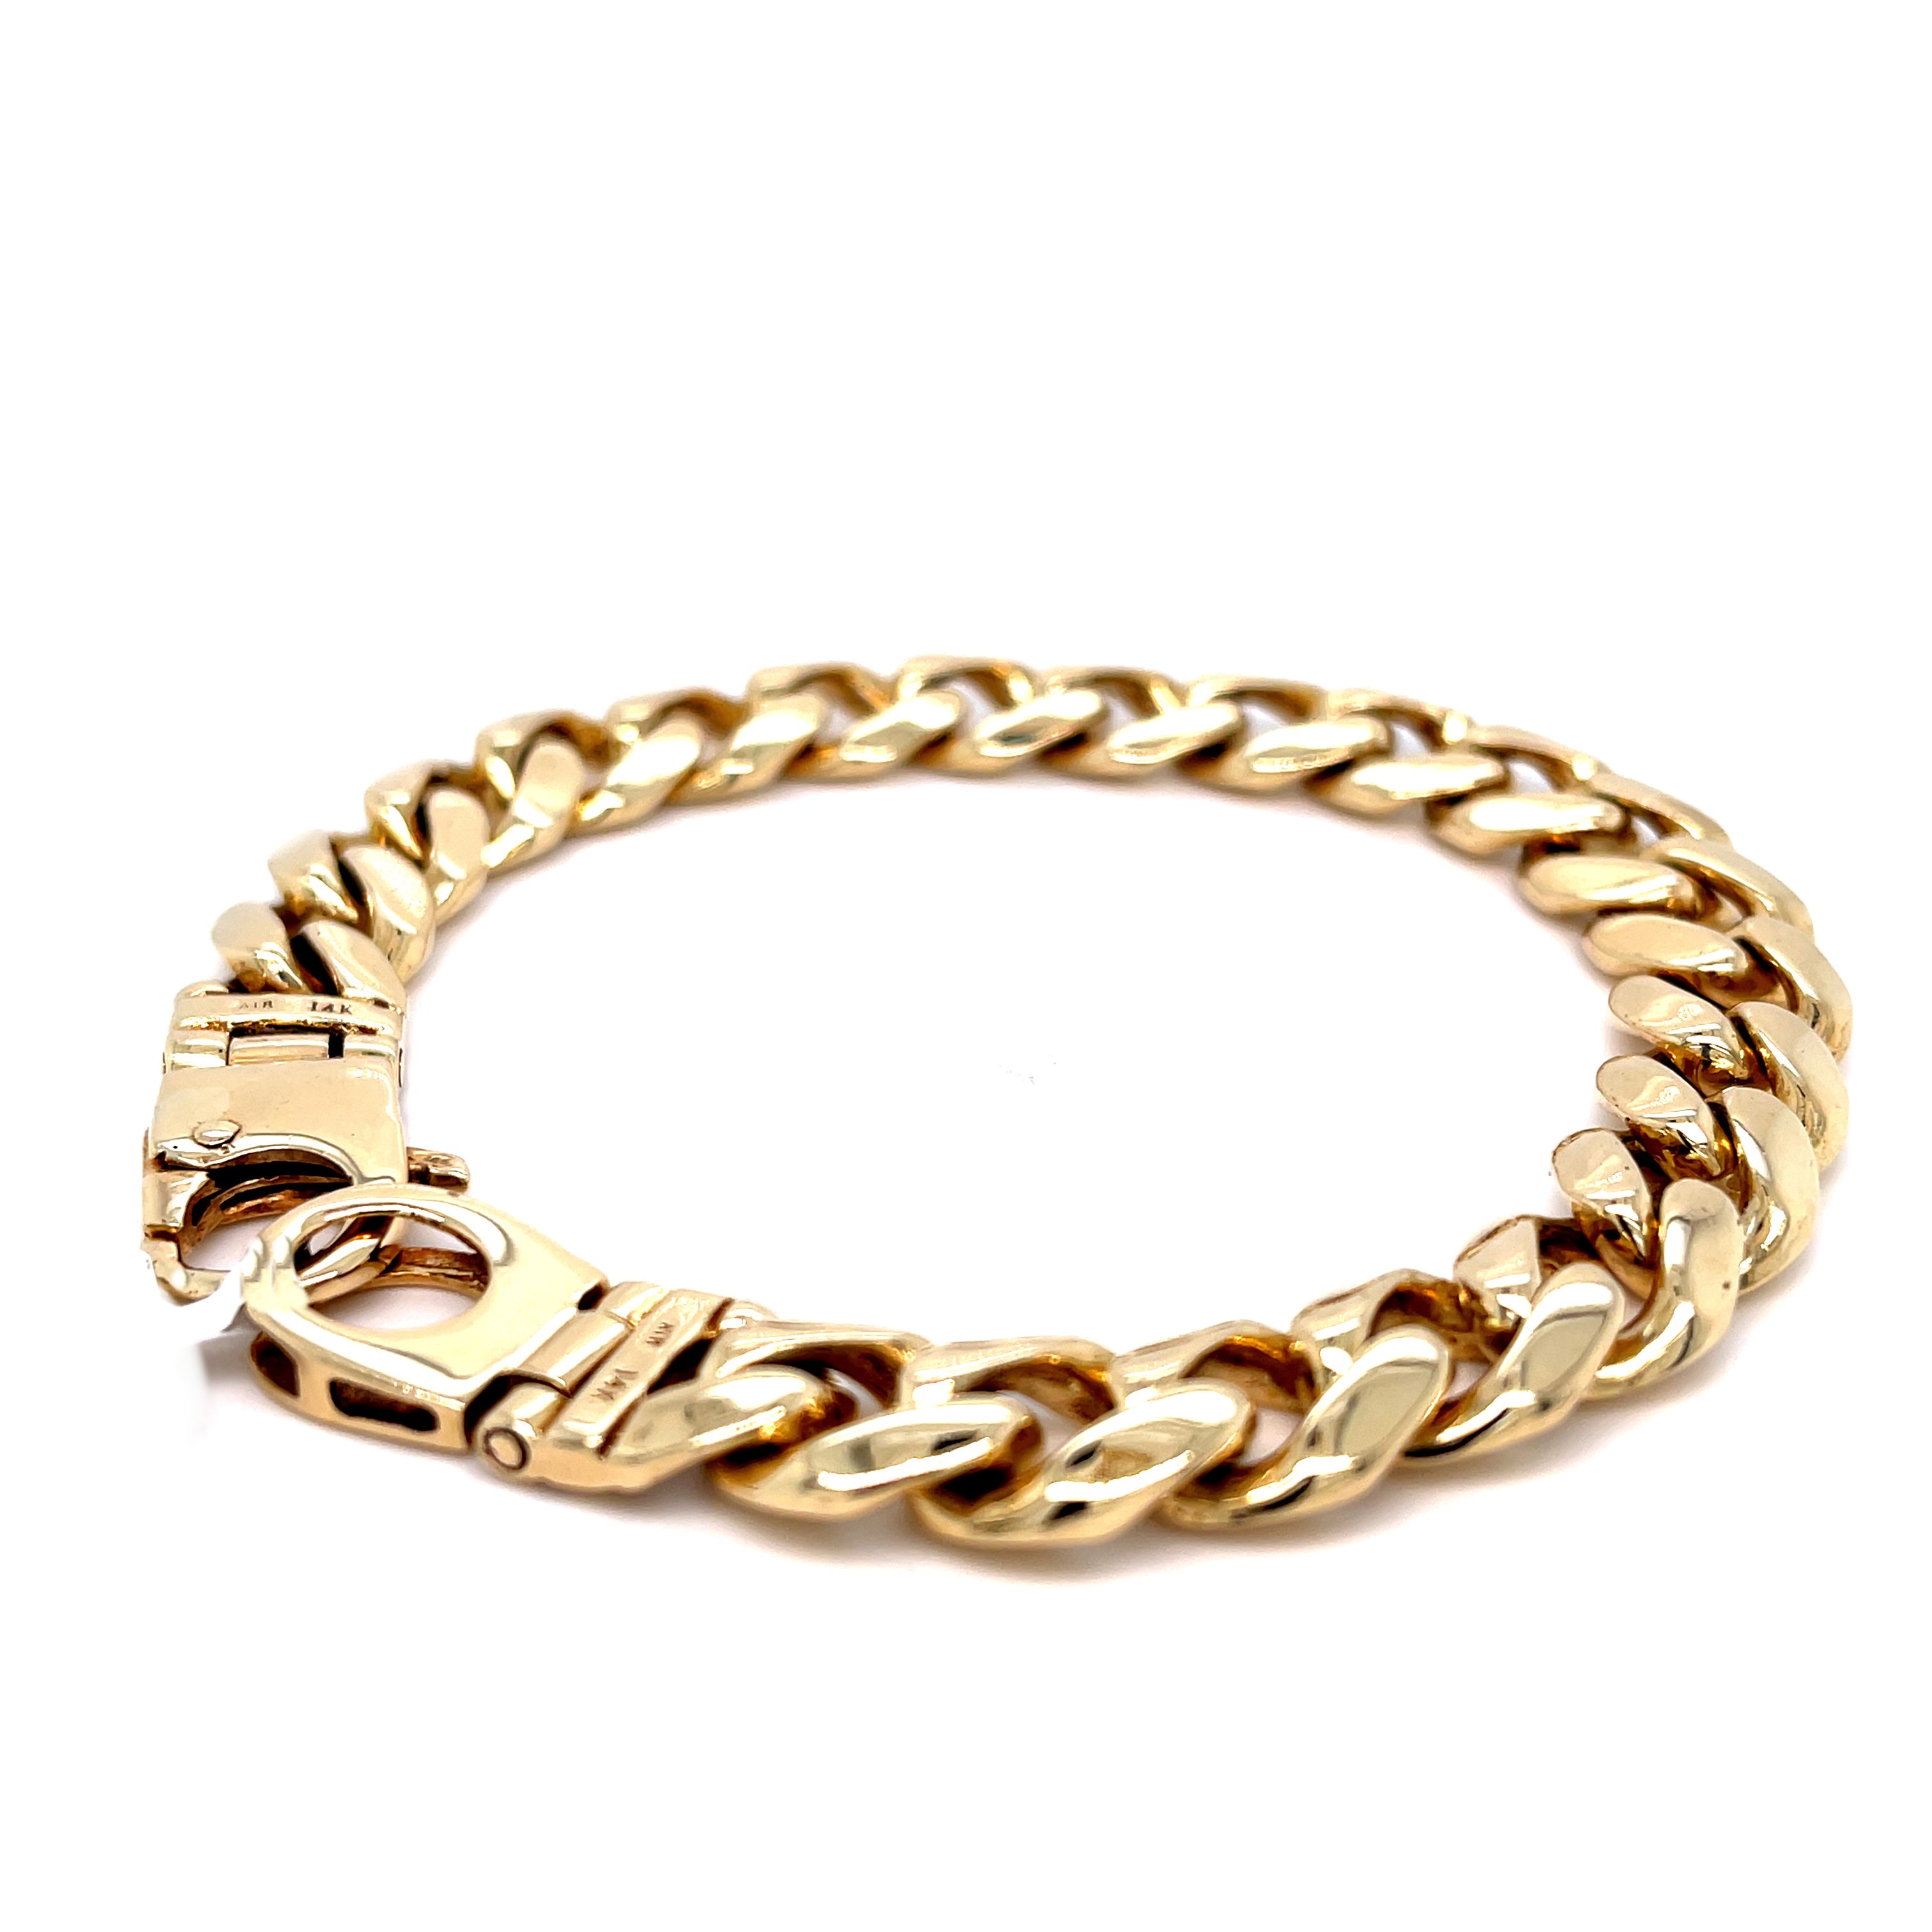 9MM Gold Chain Bracelet for men, women Diamond cut Cuban Link Real 14K gold  plated . Hip Hop Gift Jewelry : Buy Online at Best Price in KSA - Souq is  now